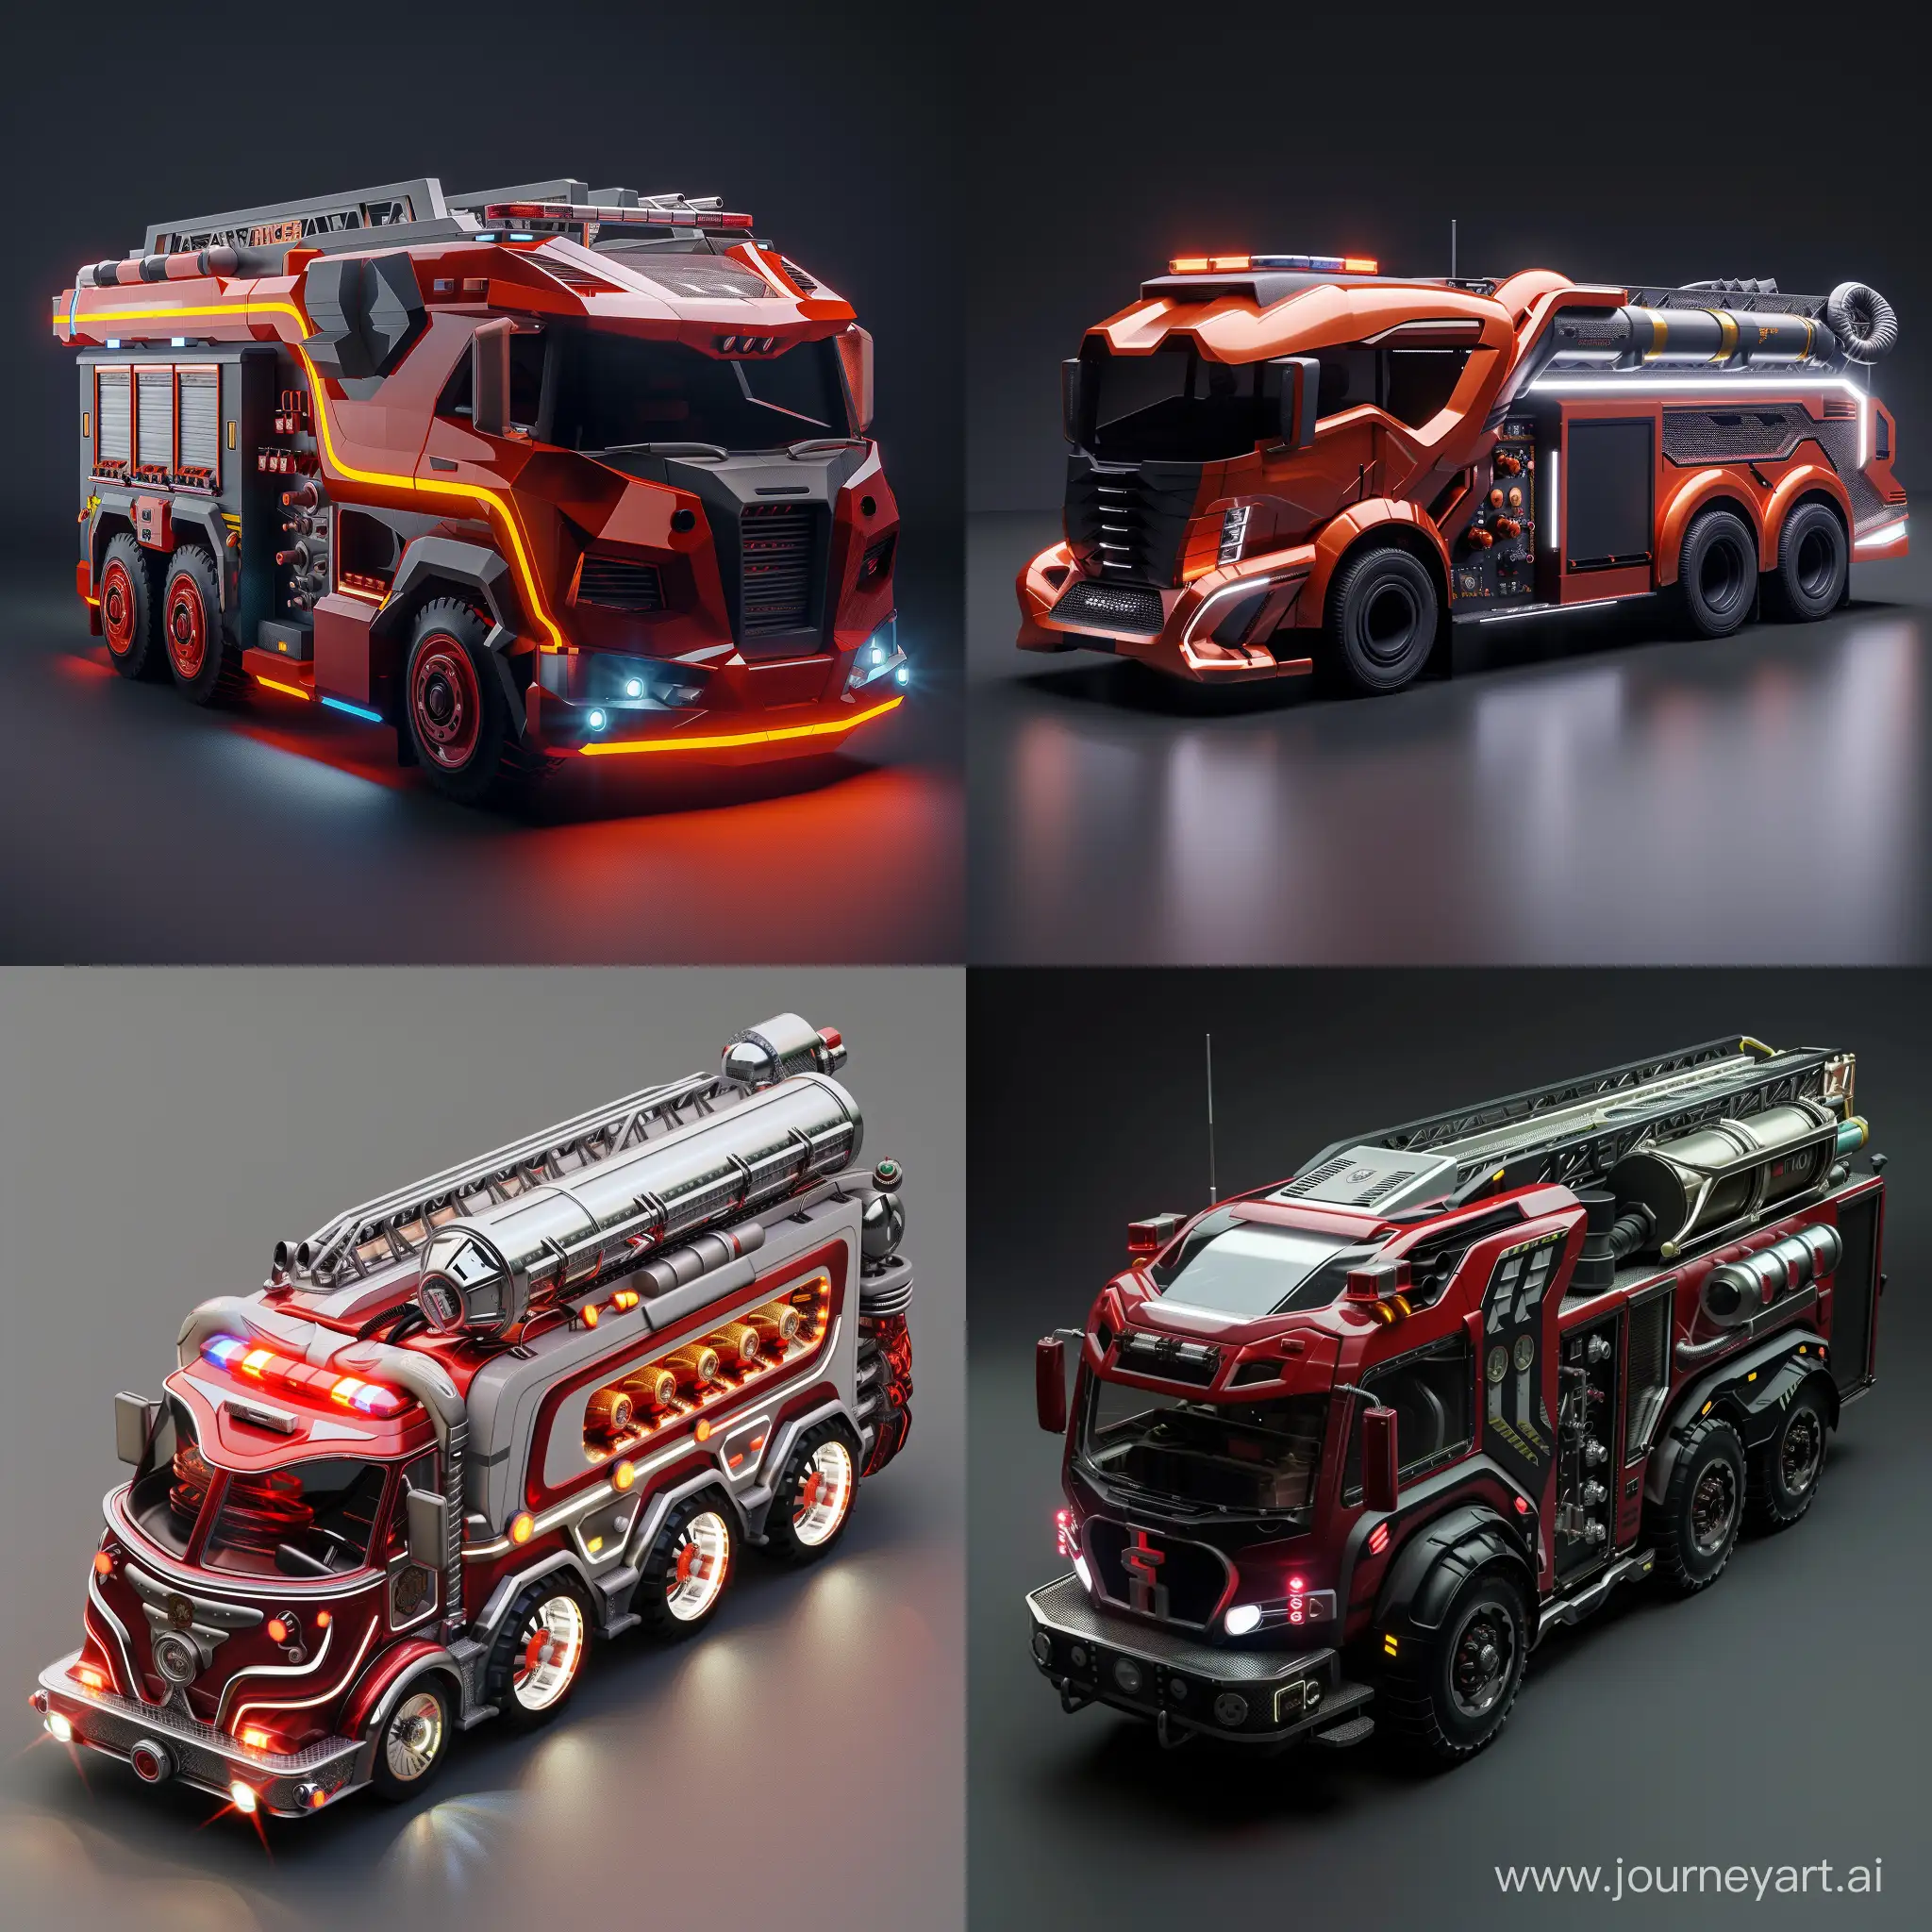 Futuristic-Fire-Truck-with-Modern-Style-and-HighOctane-Render